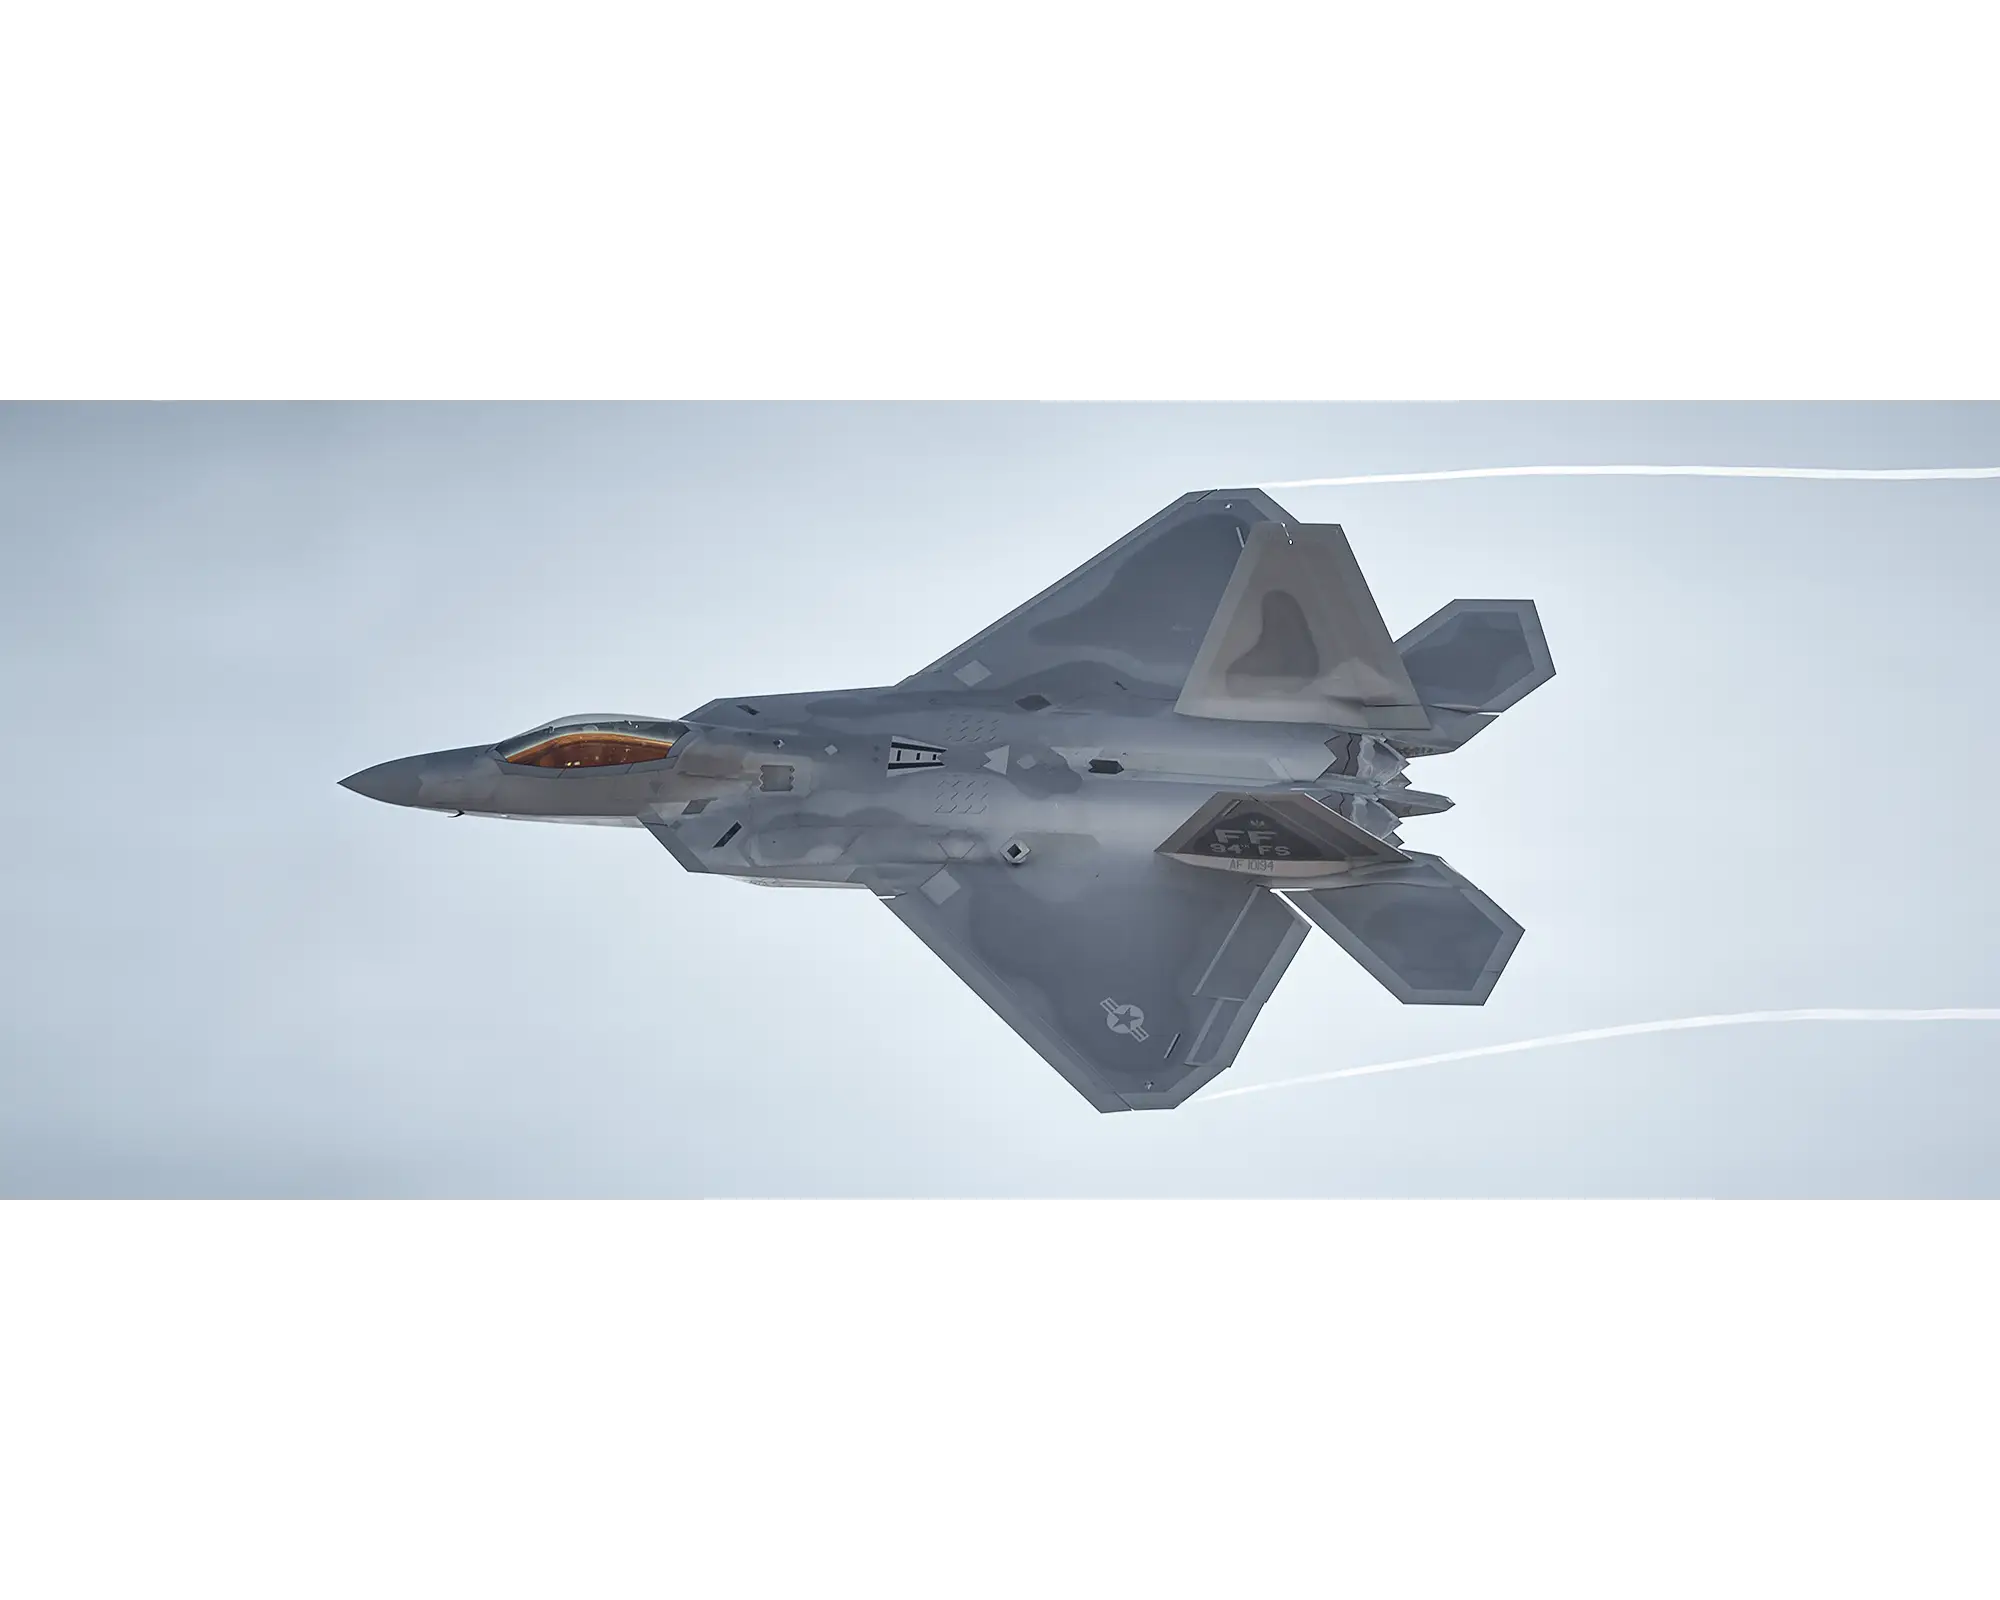 United States Air Force F-22 Raptor in flight.